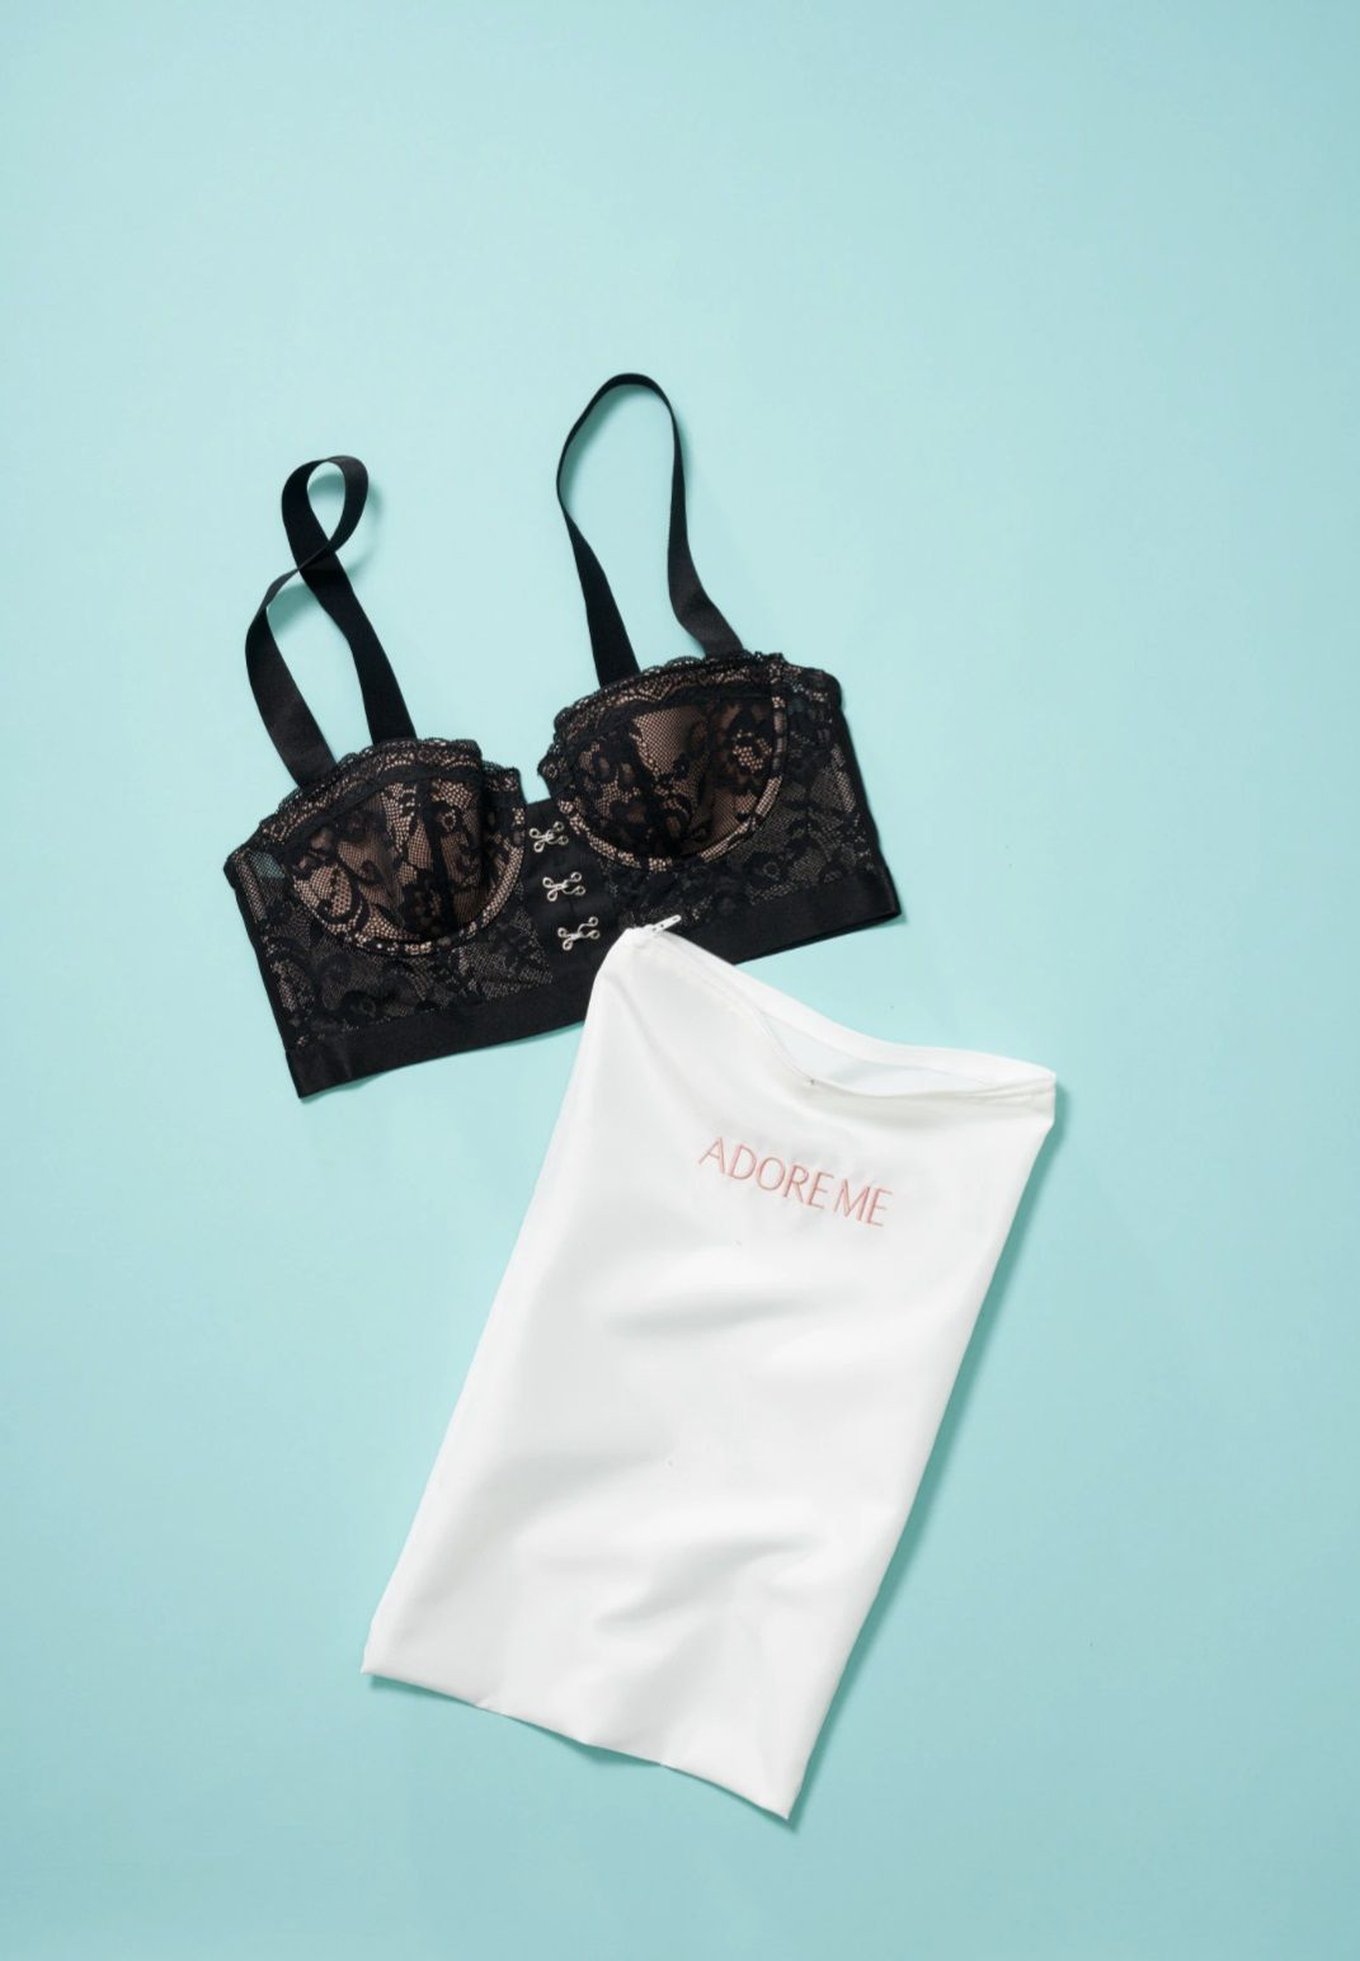 Lingerie Accessories: Cleansers, Pads, Wash Bags & More